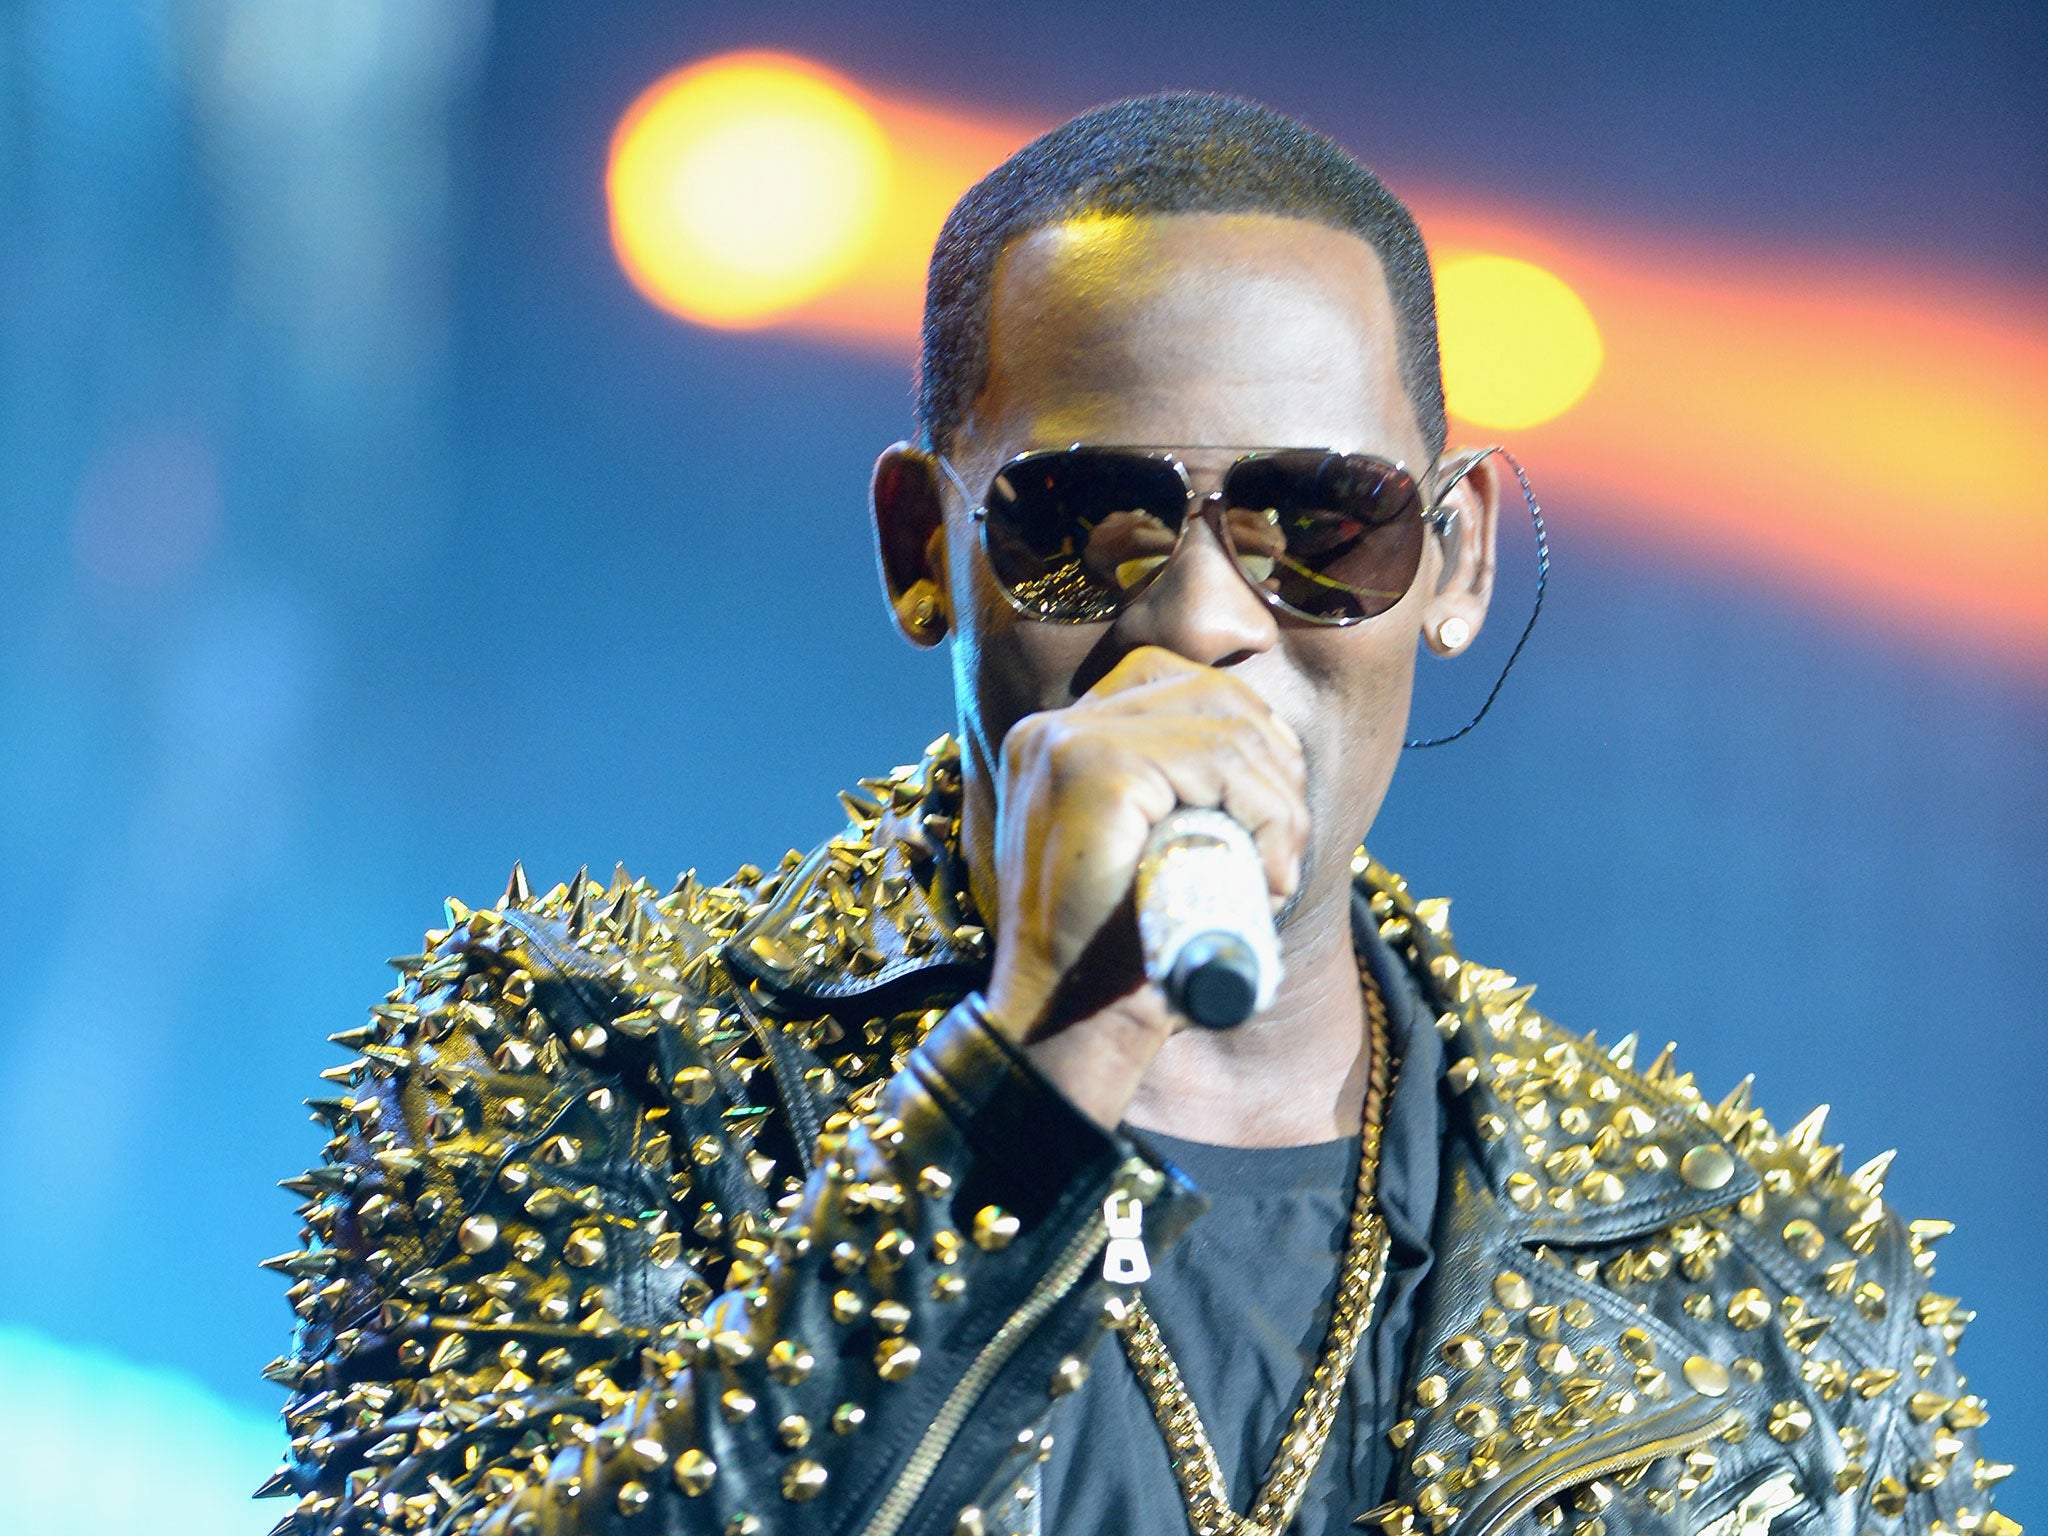 There are no plans to replace R Kelly at the event